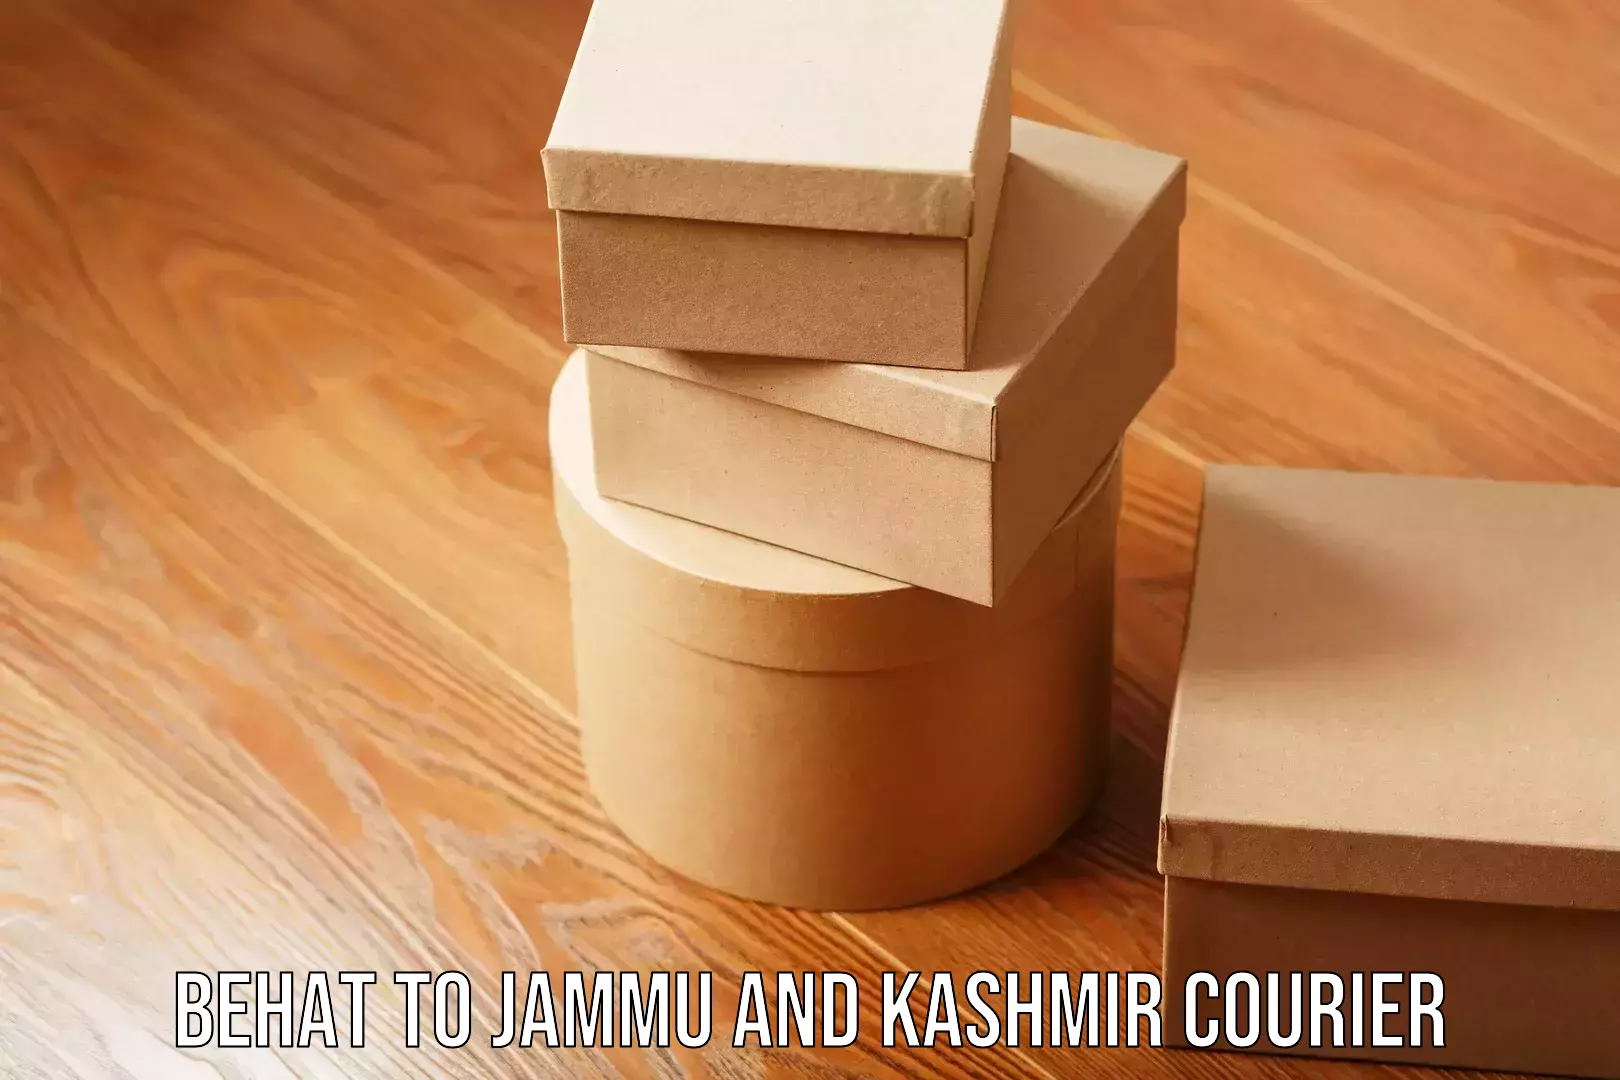 Fast-track shipping solutions Behat to Jammu and Kashmir